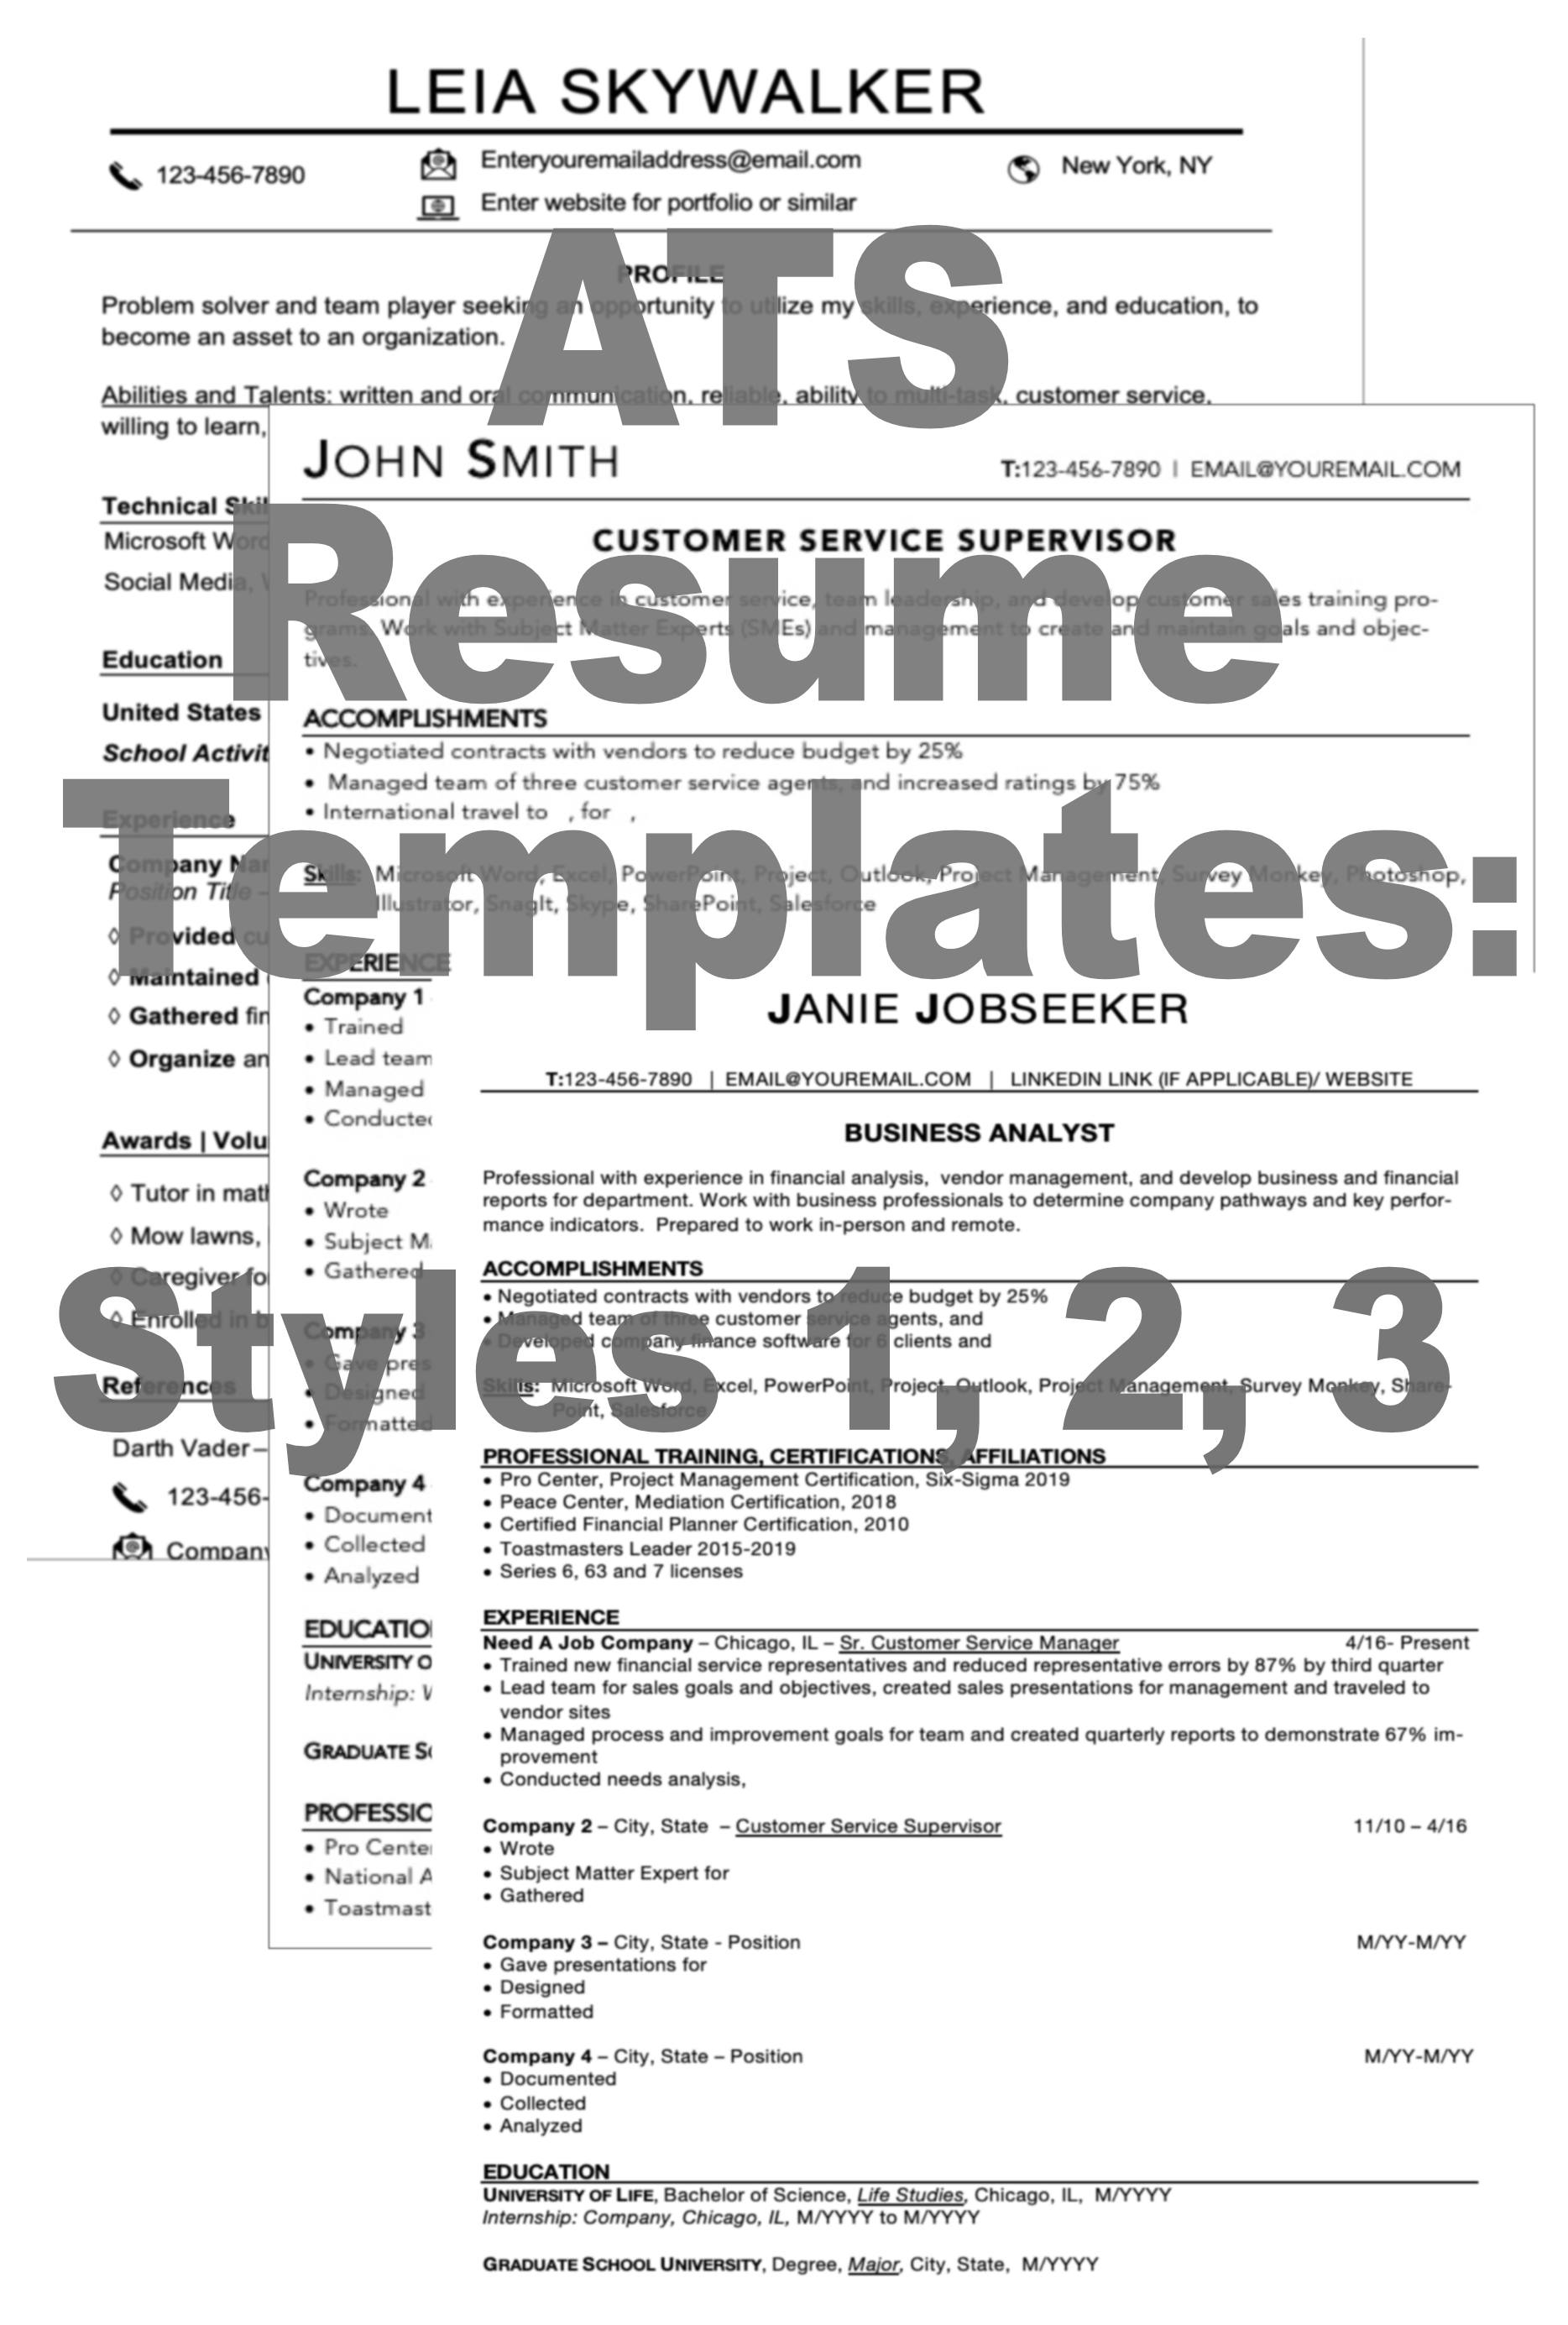 ATS friendly resume format word